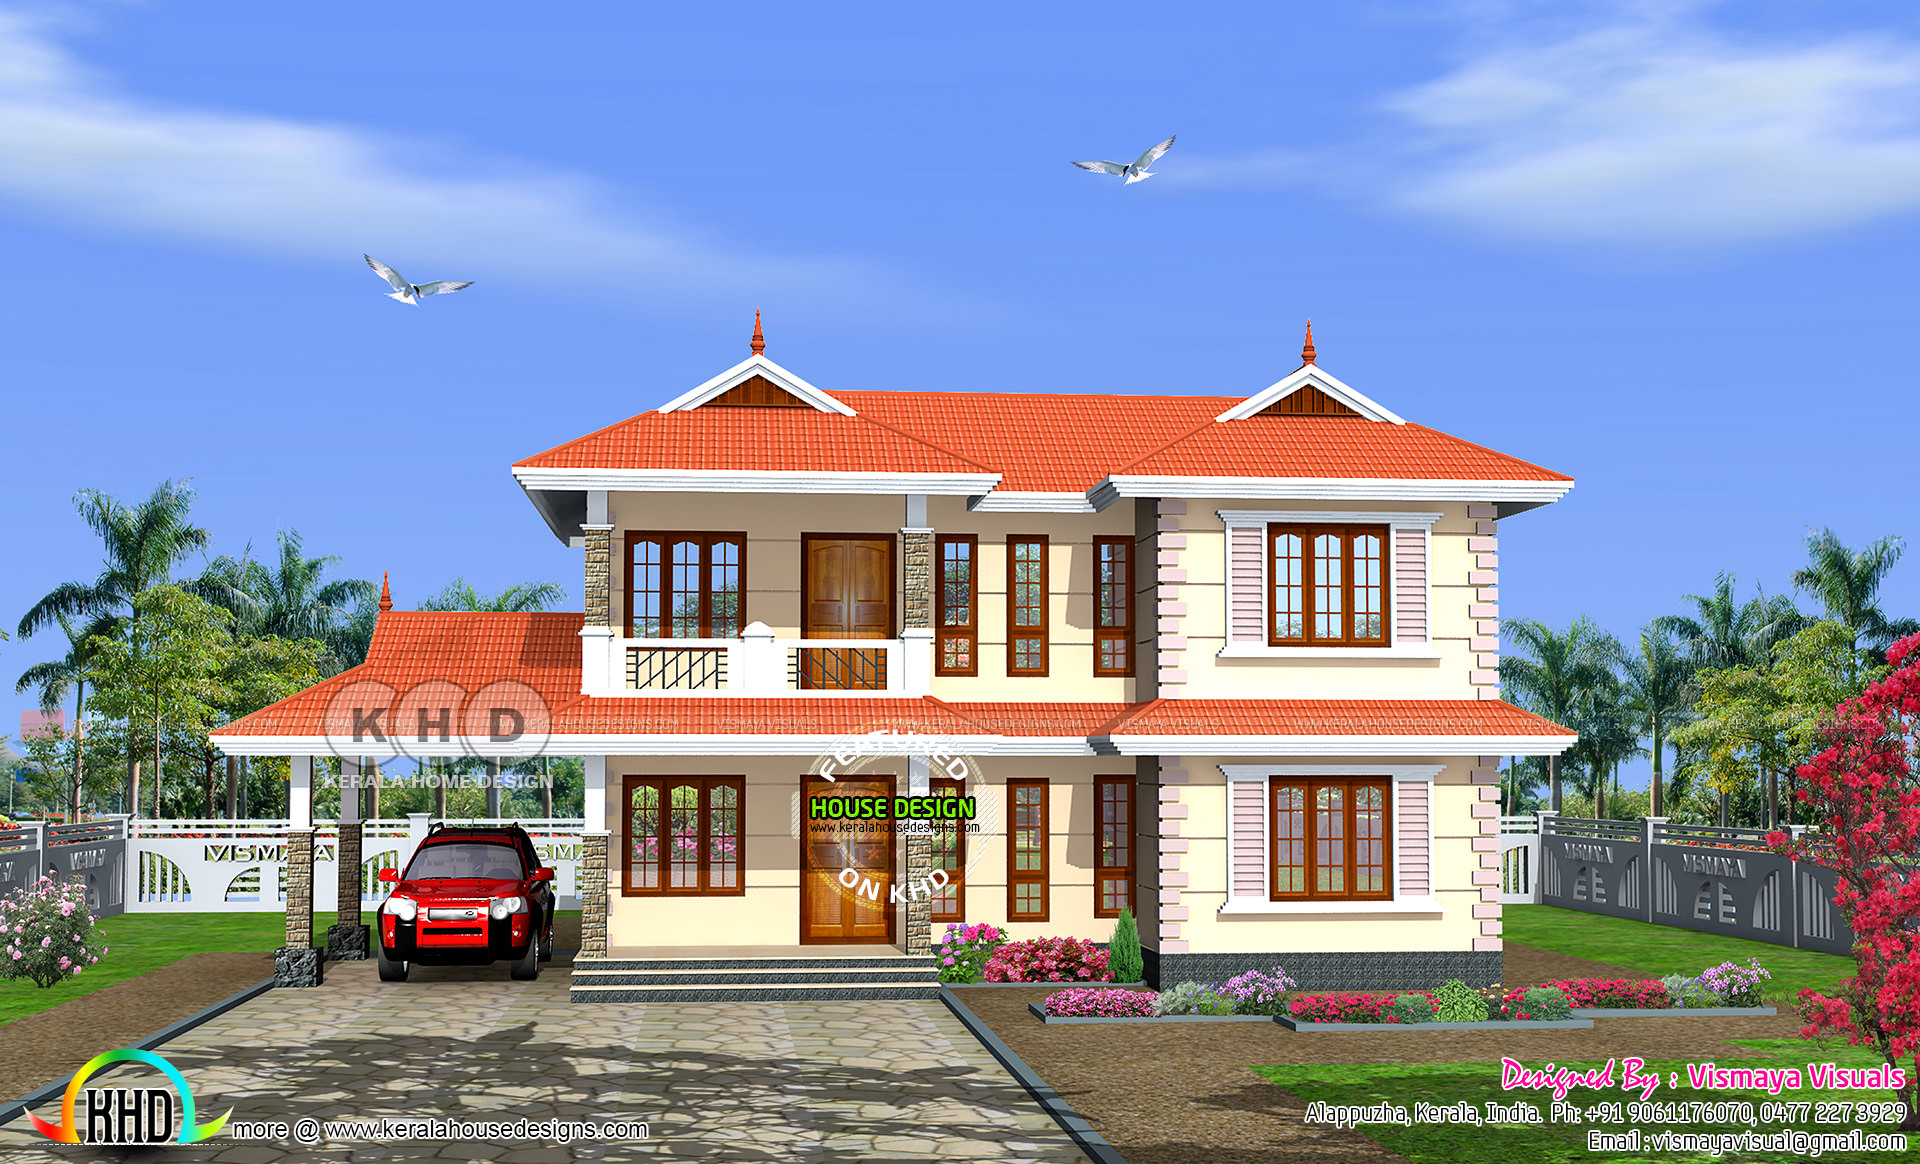 3 bedroom Typical Kerala home 1948 square feet - Kerala home design and